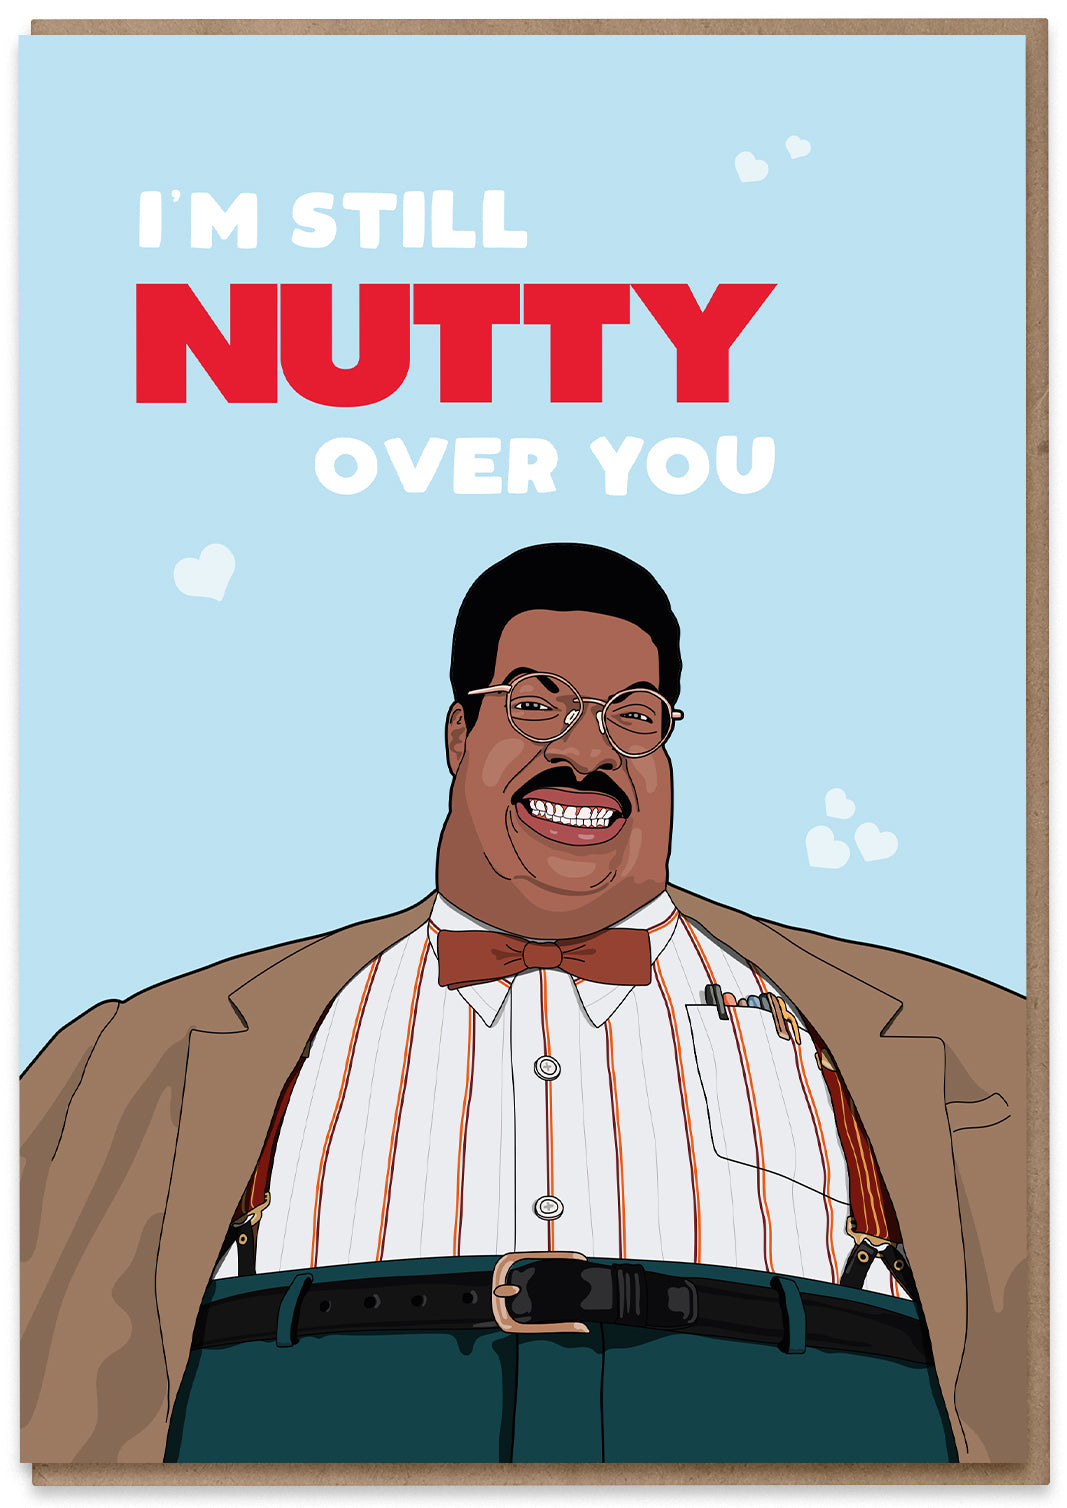 Nutty Over You